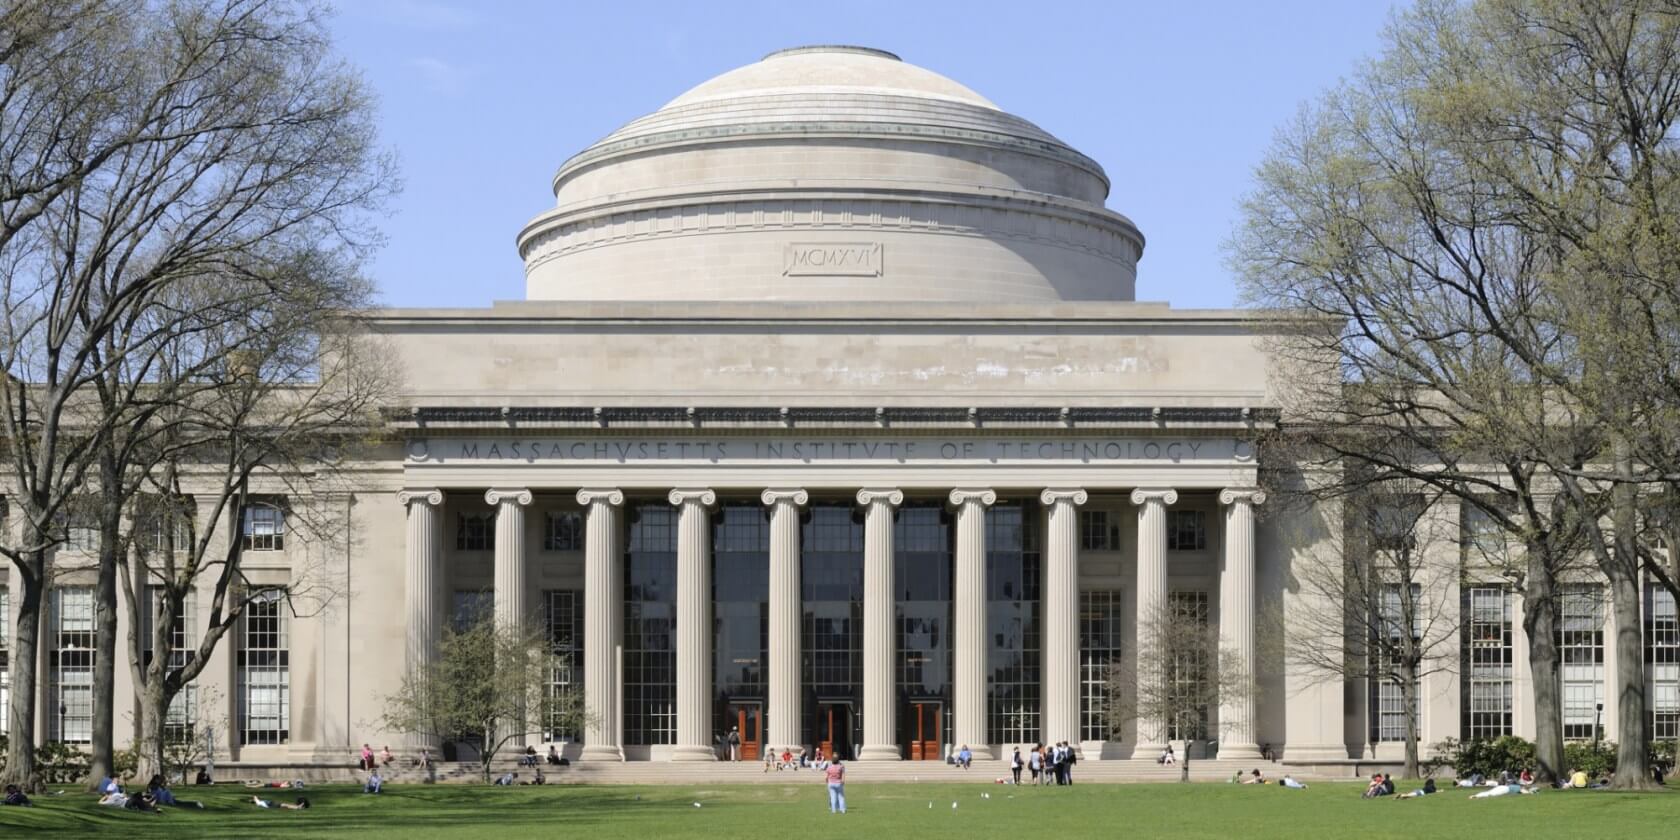 MIT breaks ties with Huawei and ZTE over security risks, government investigations